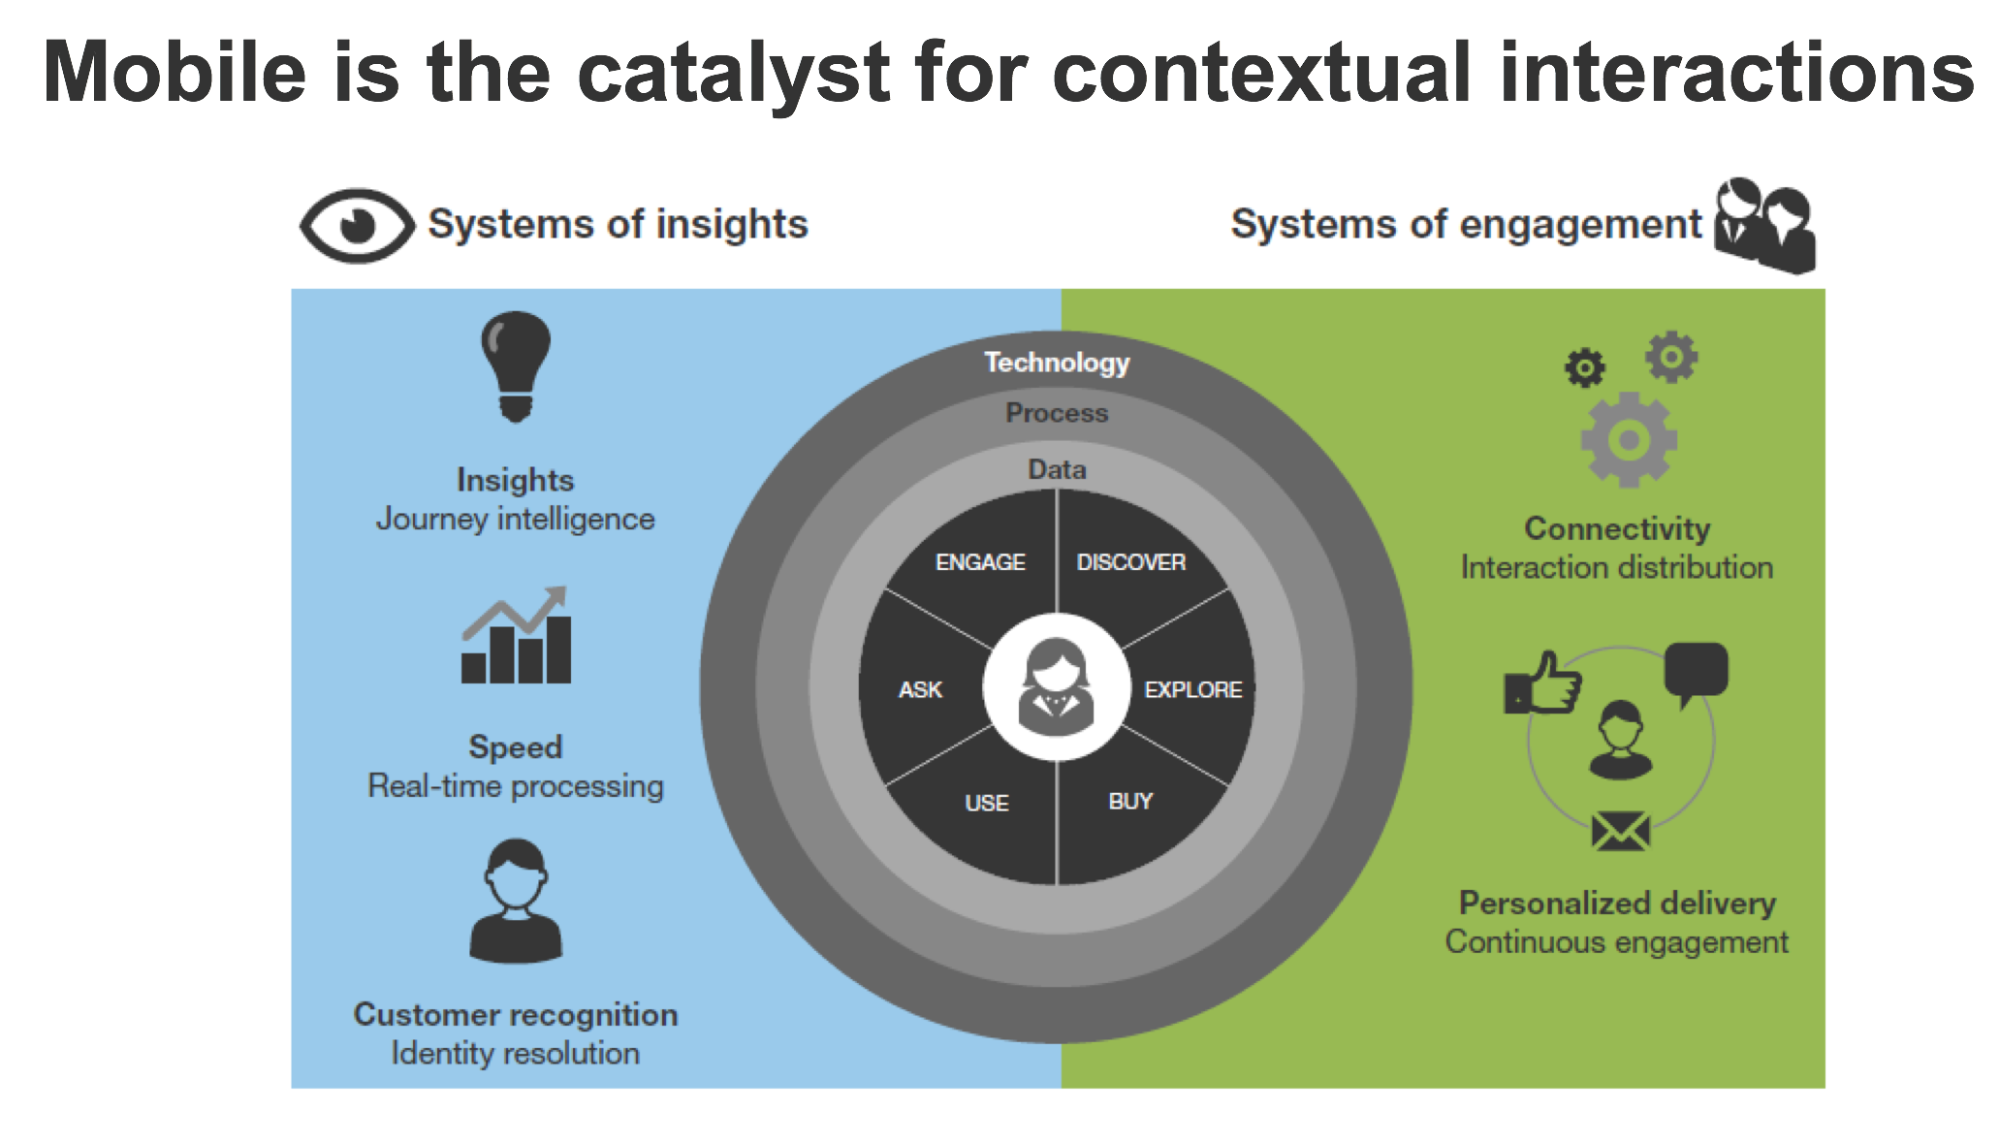 forrester-mobile-is-the-catalyst-for-contextual-interactions-state-of-mobile-marketer-tactics-webinar-slide